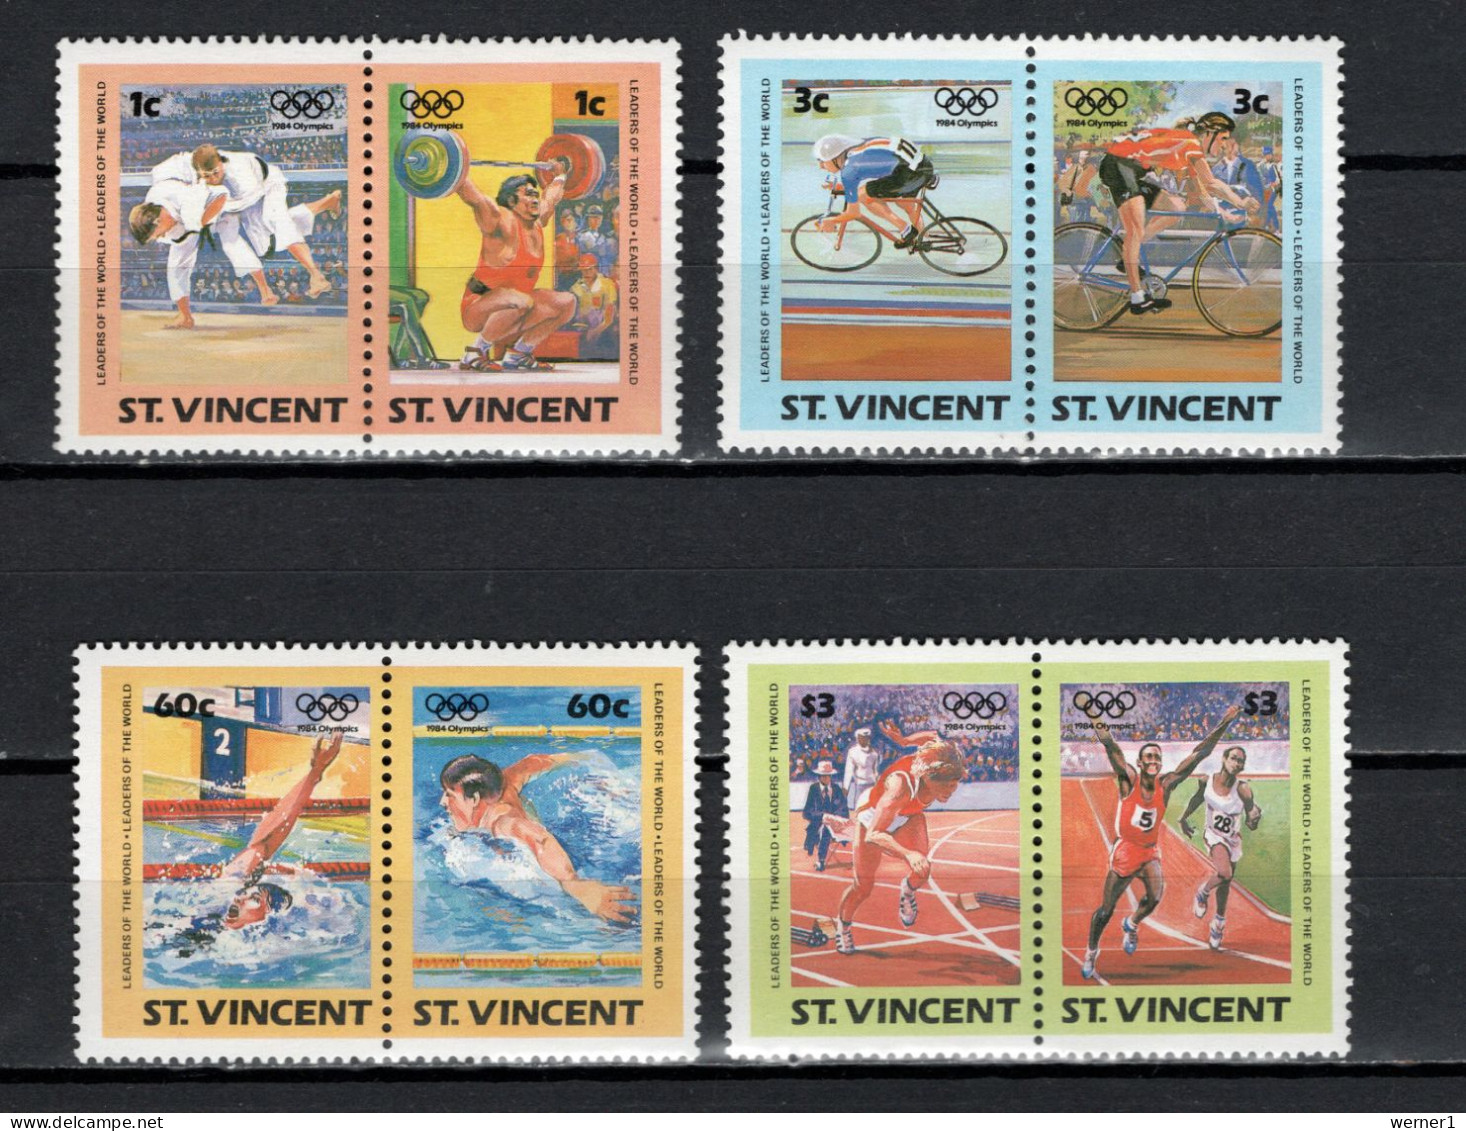 St. Vincent 1984 Olympic Games Los Angeles, Judo, Weightlifting, Cycling, Swimming, Athletics Set Of 8 MNH - Summer 1984: Los Angeles